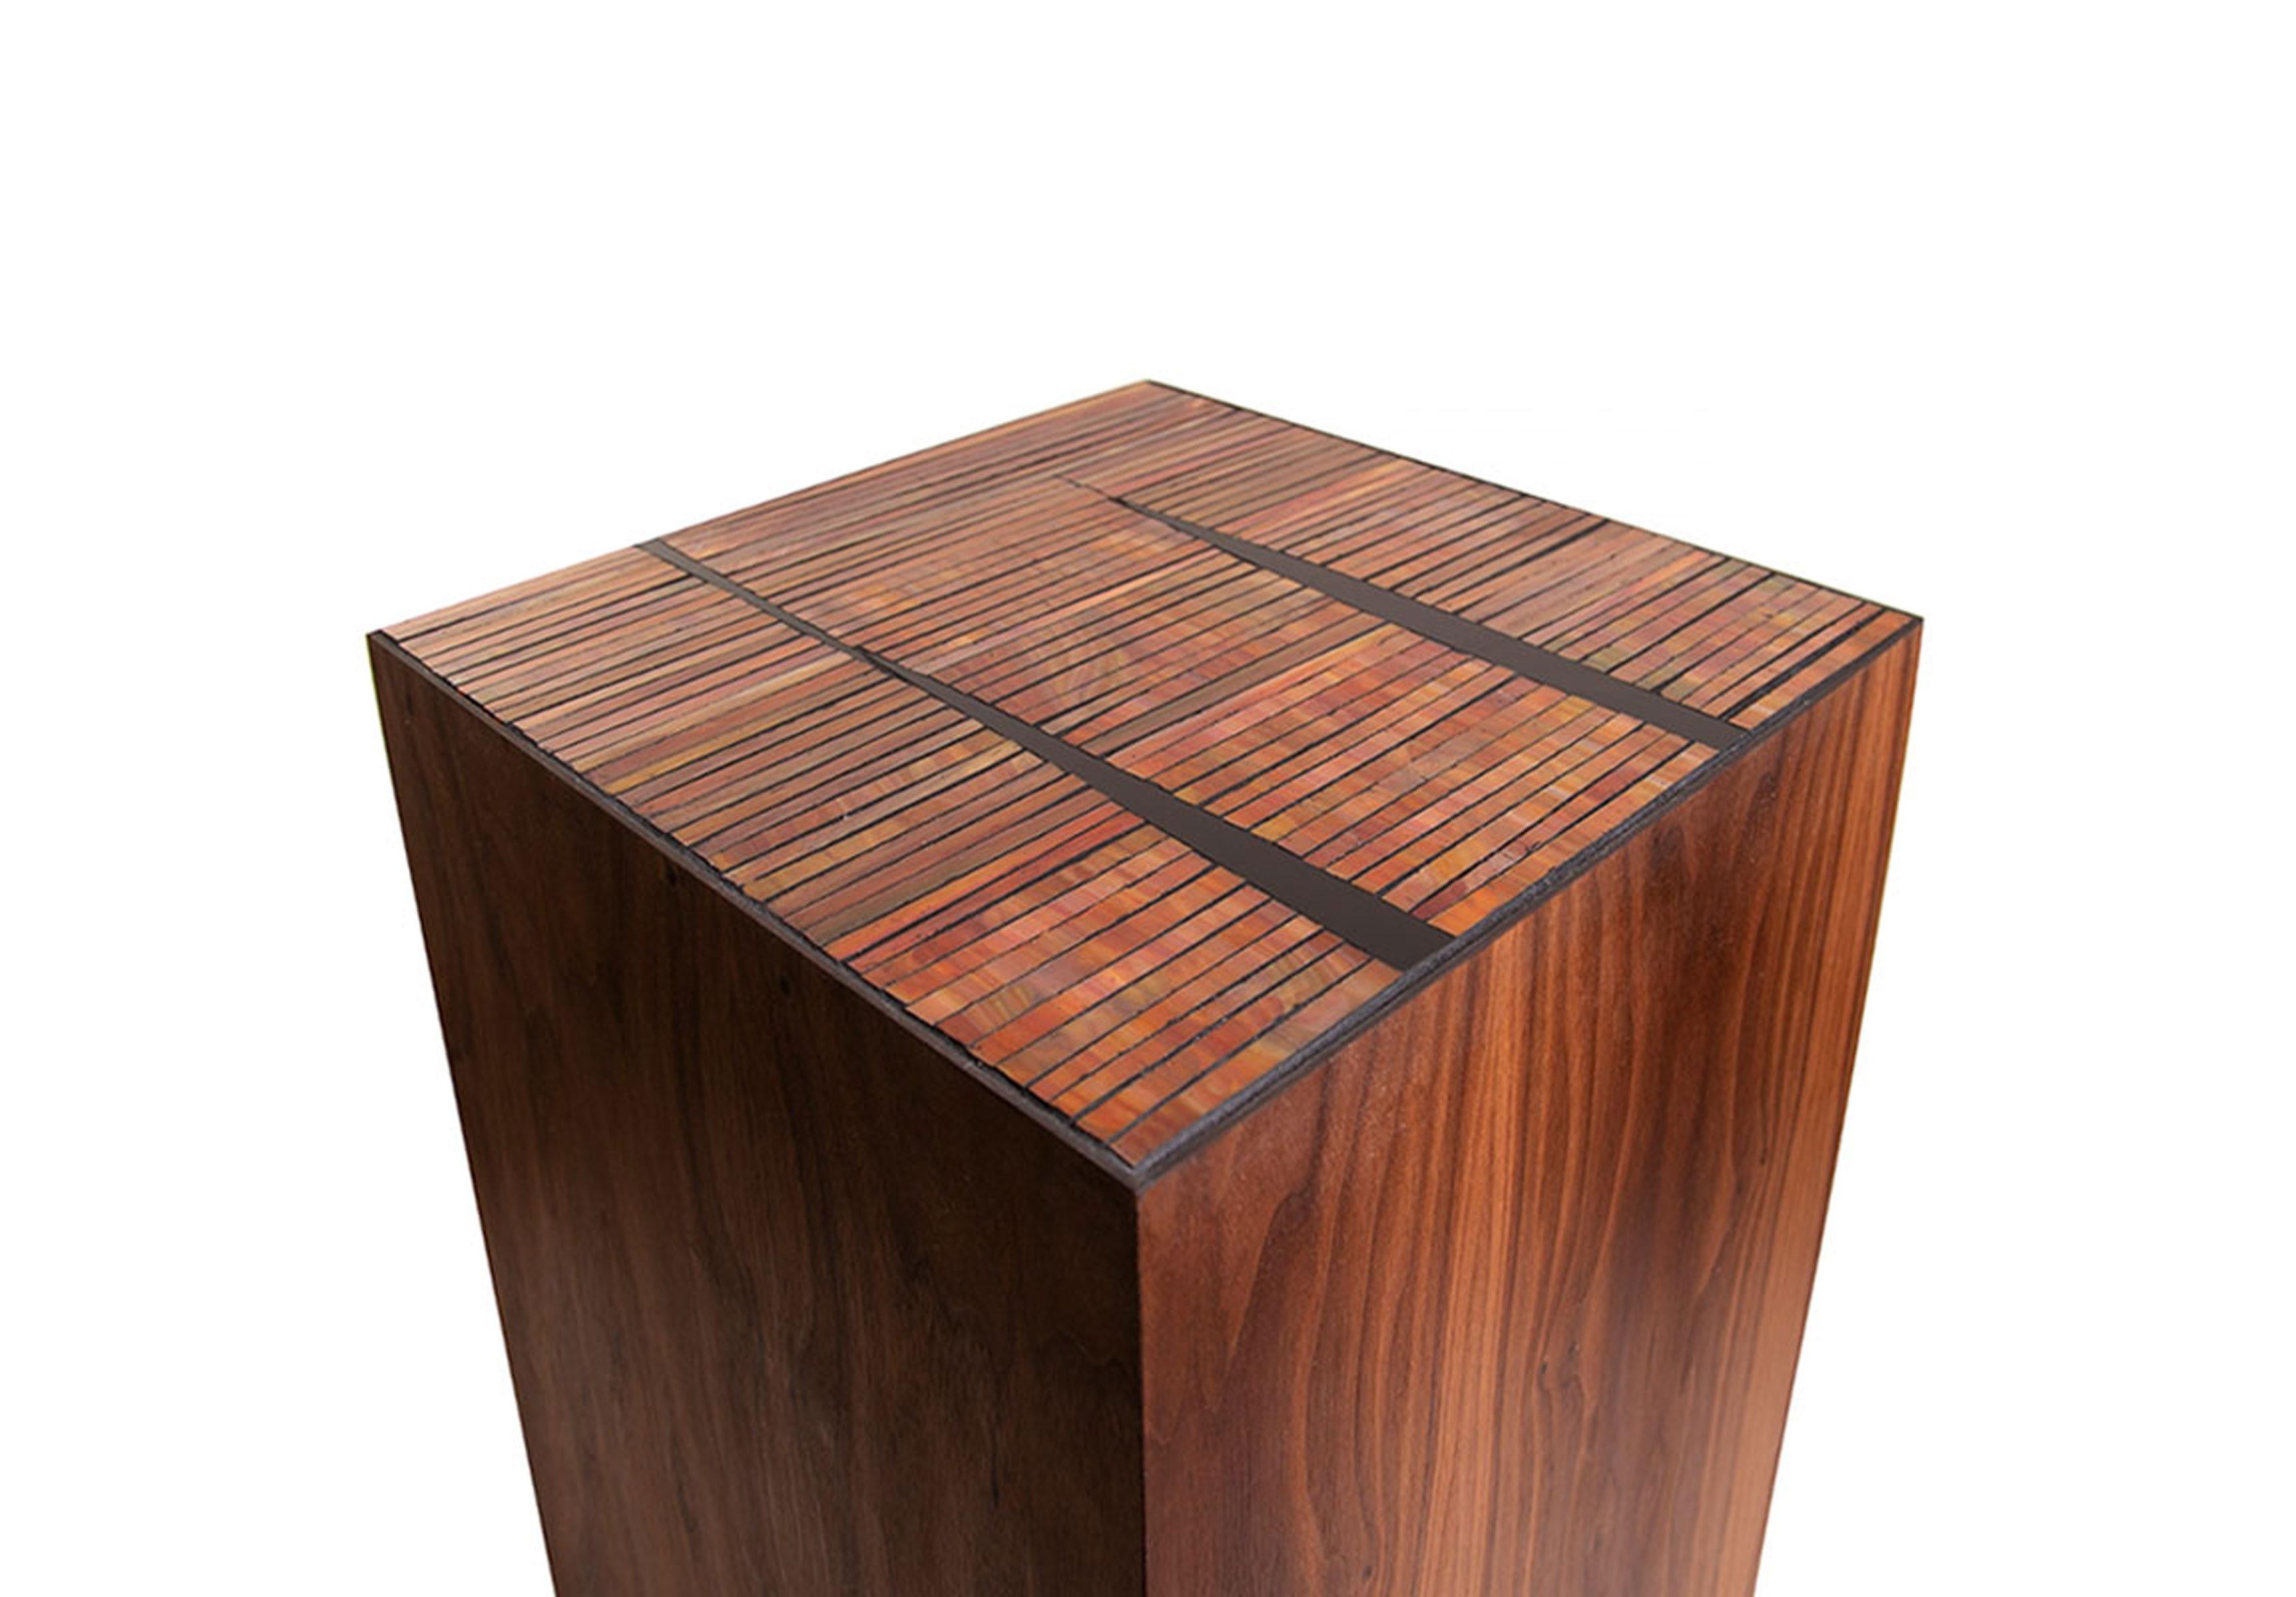 The Natura Pedestal by Ercole Home has a natural wood finish on walnut. Hand-cut glass mosaics in orange/ red and black glass mosaic decorate the top surface in our Sycamore pattern.
Custom sizes and finishes are available.
Made in New York